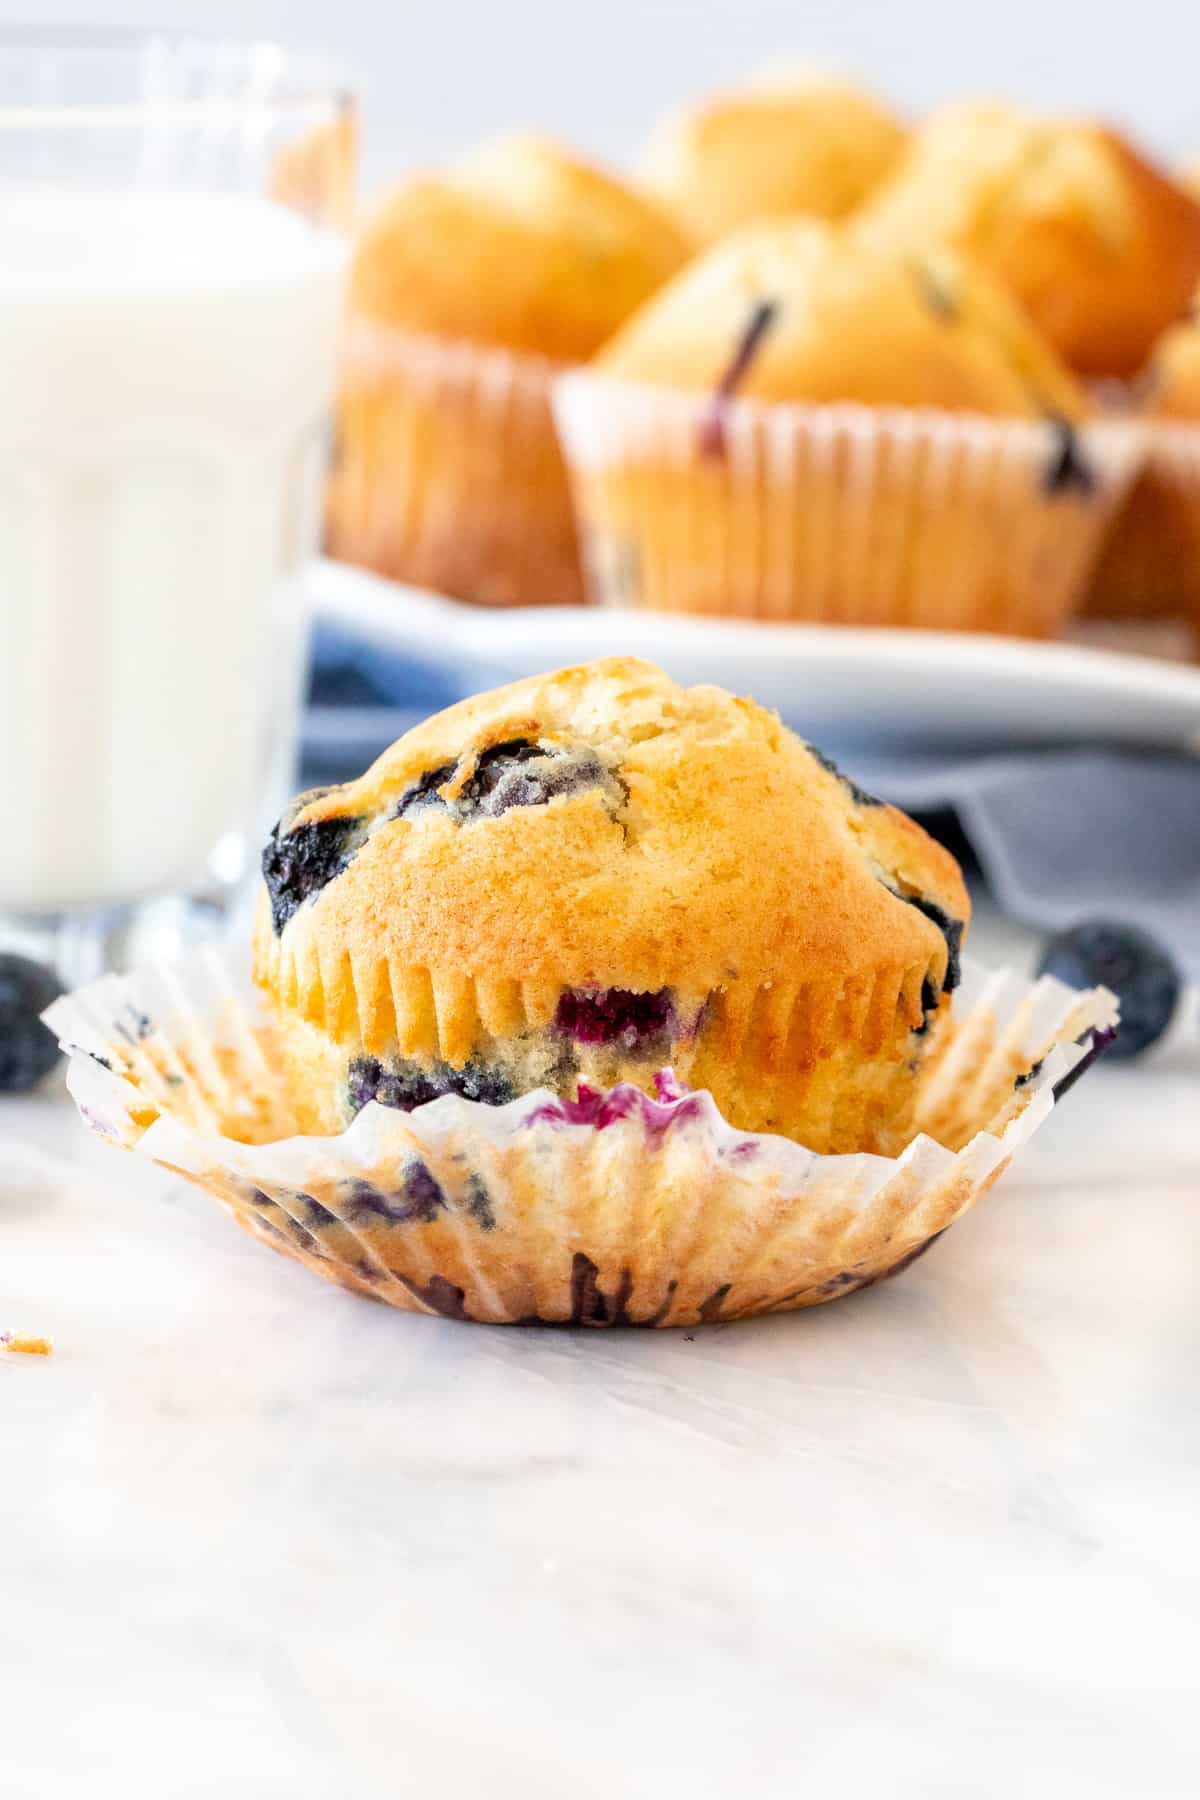 Blueberry muffin with a glass of milk